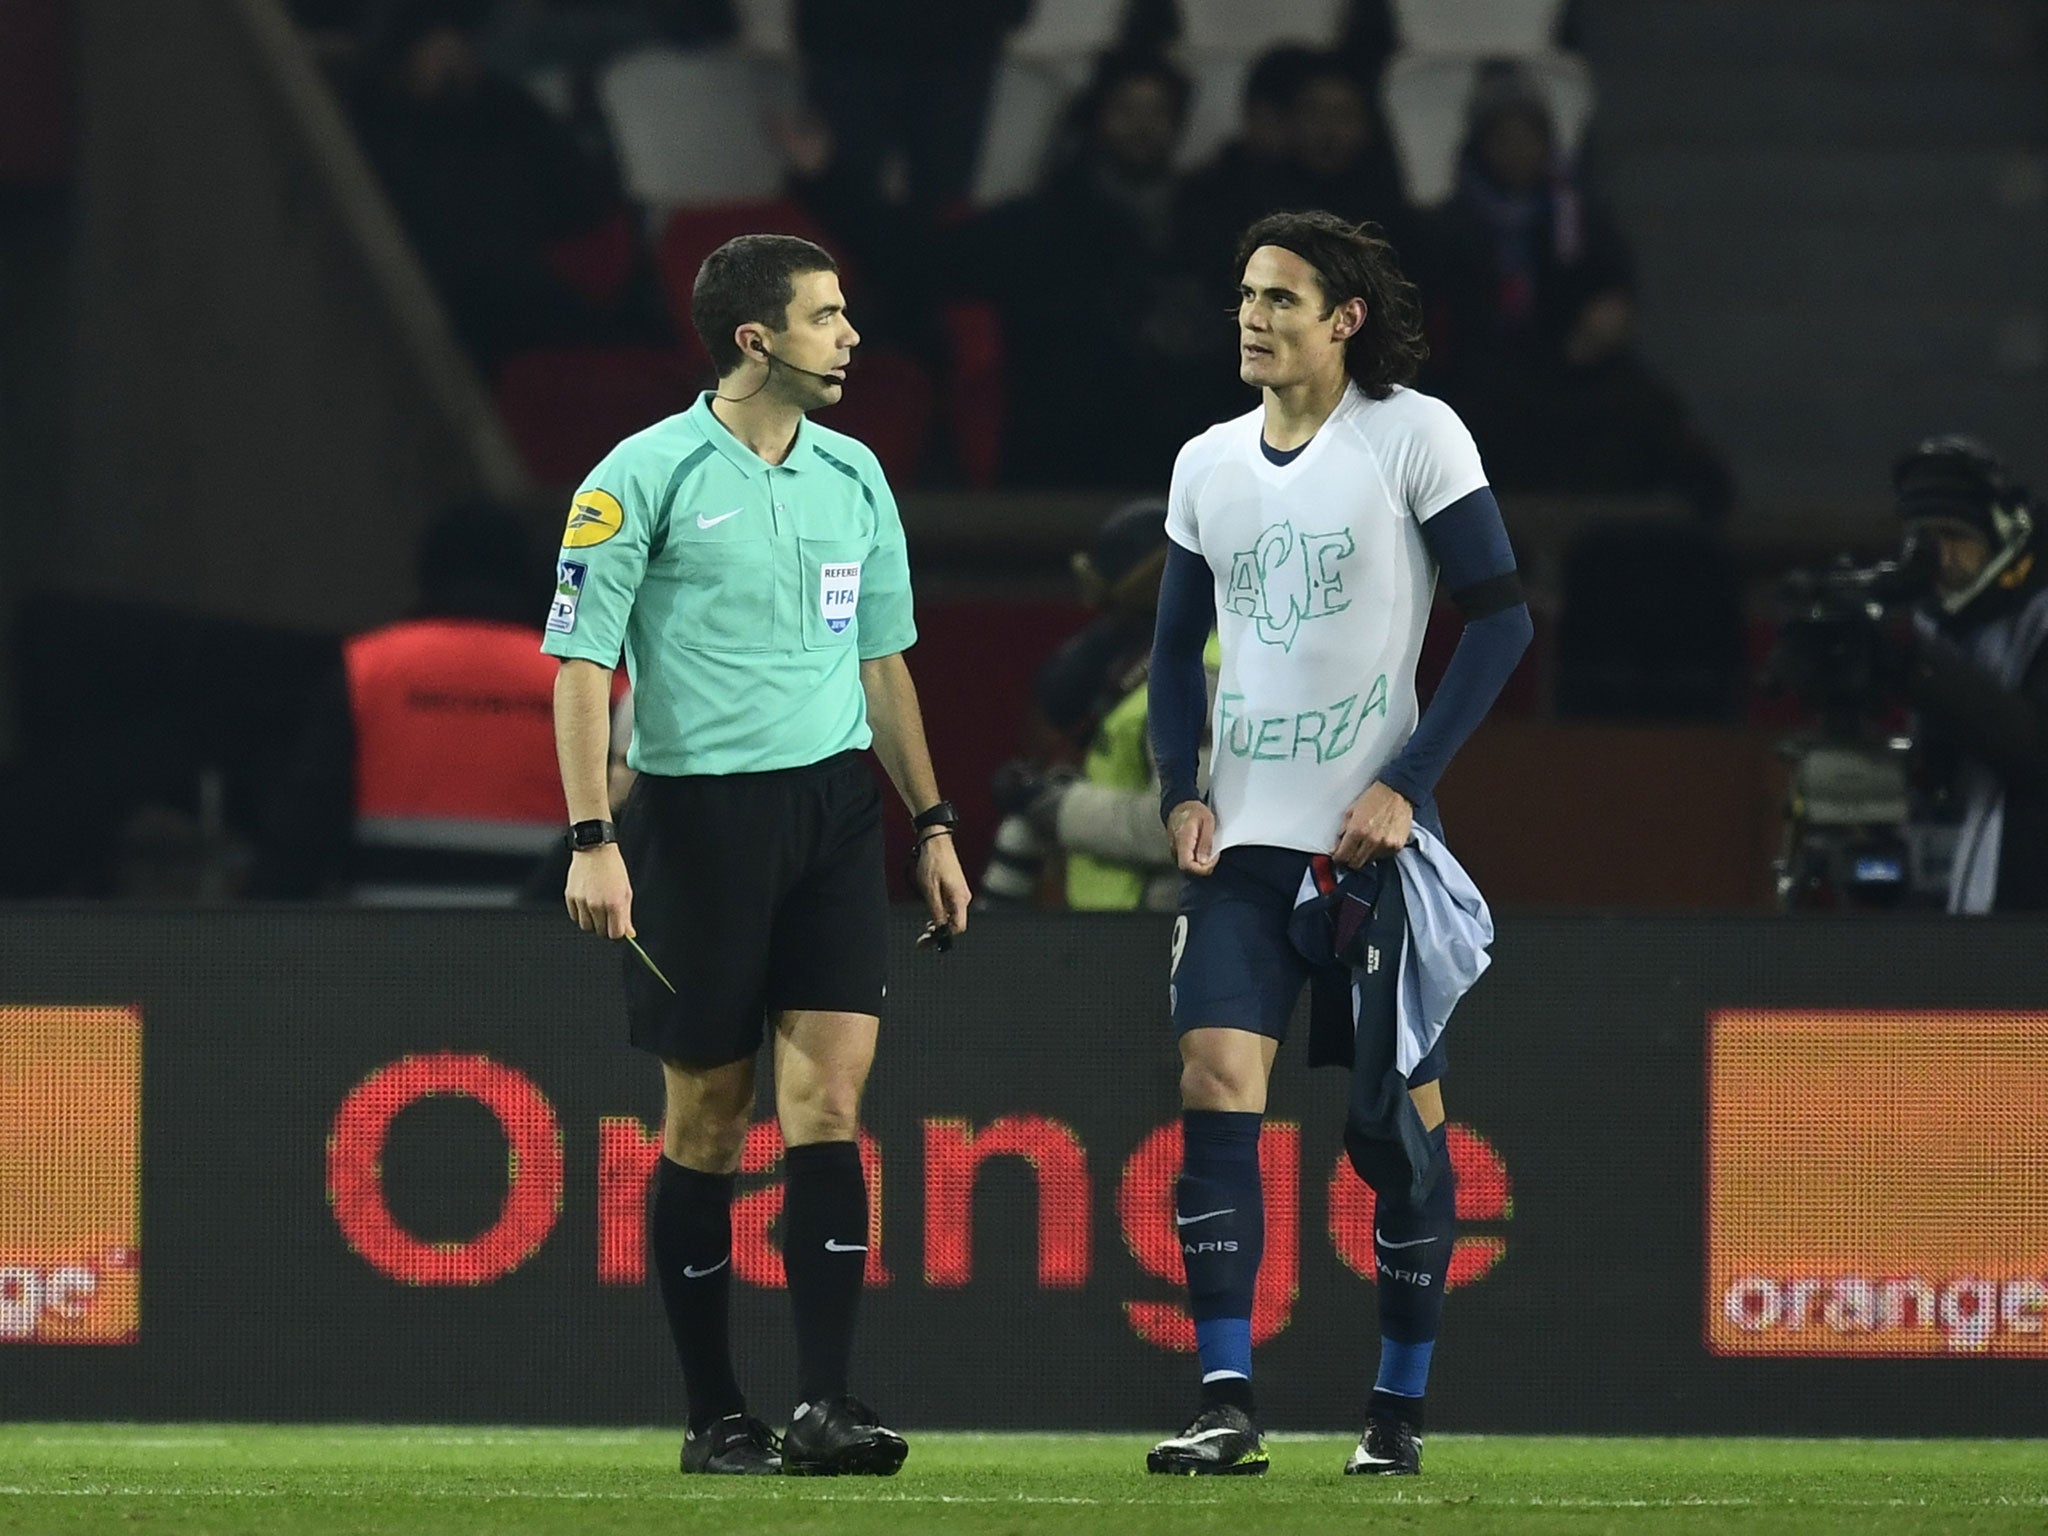 Edinson Cavani was booked by referee Franck Schneider for taking off his shirt